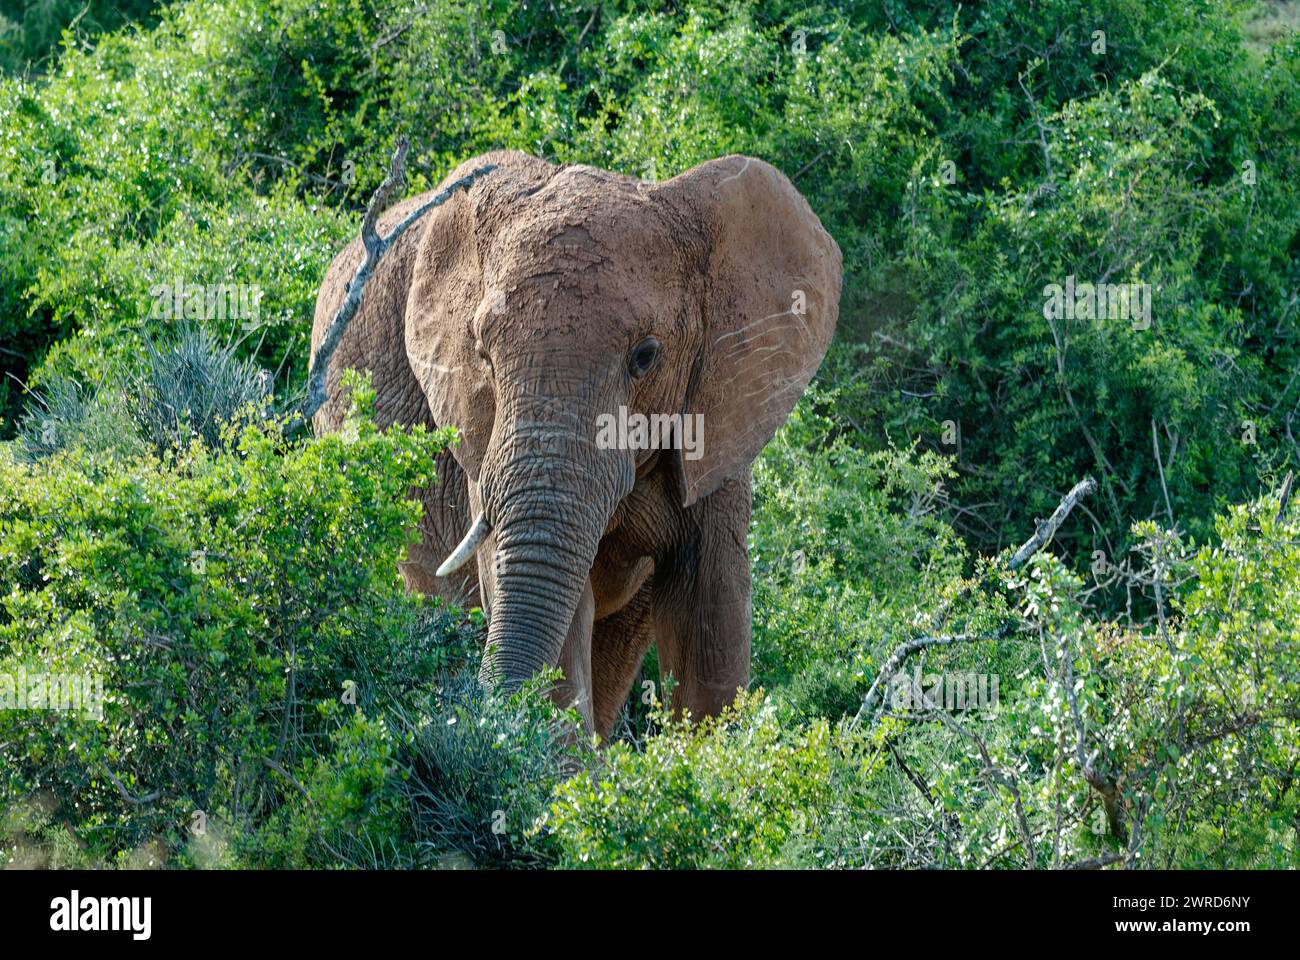 Elephants at play - large elephant missing one tusk standing in the middle of trees and bushes. Delightful frame. Stock Photo